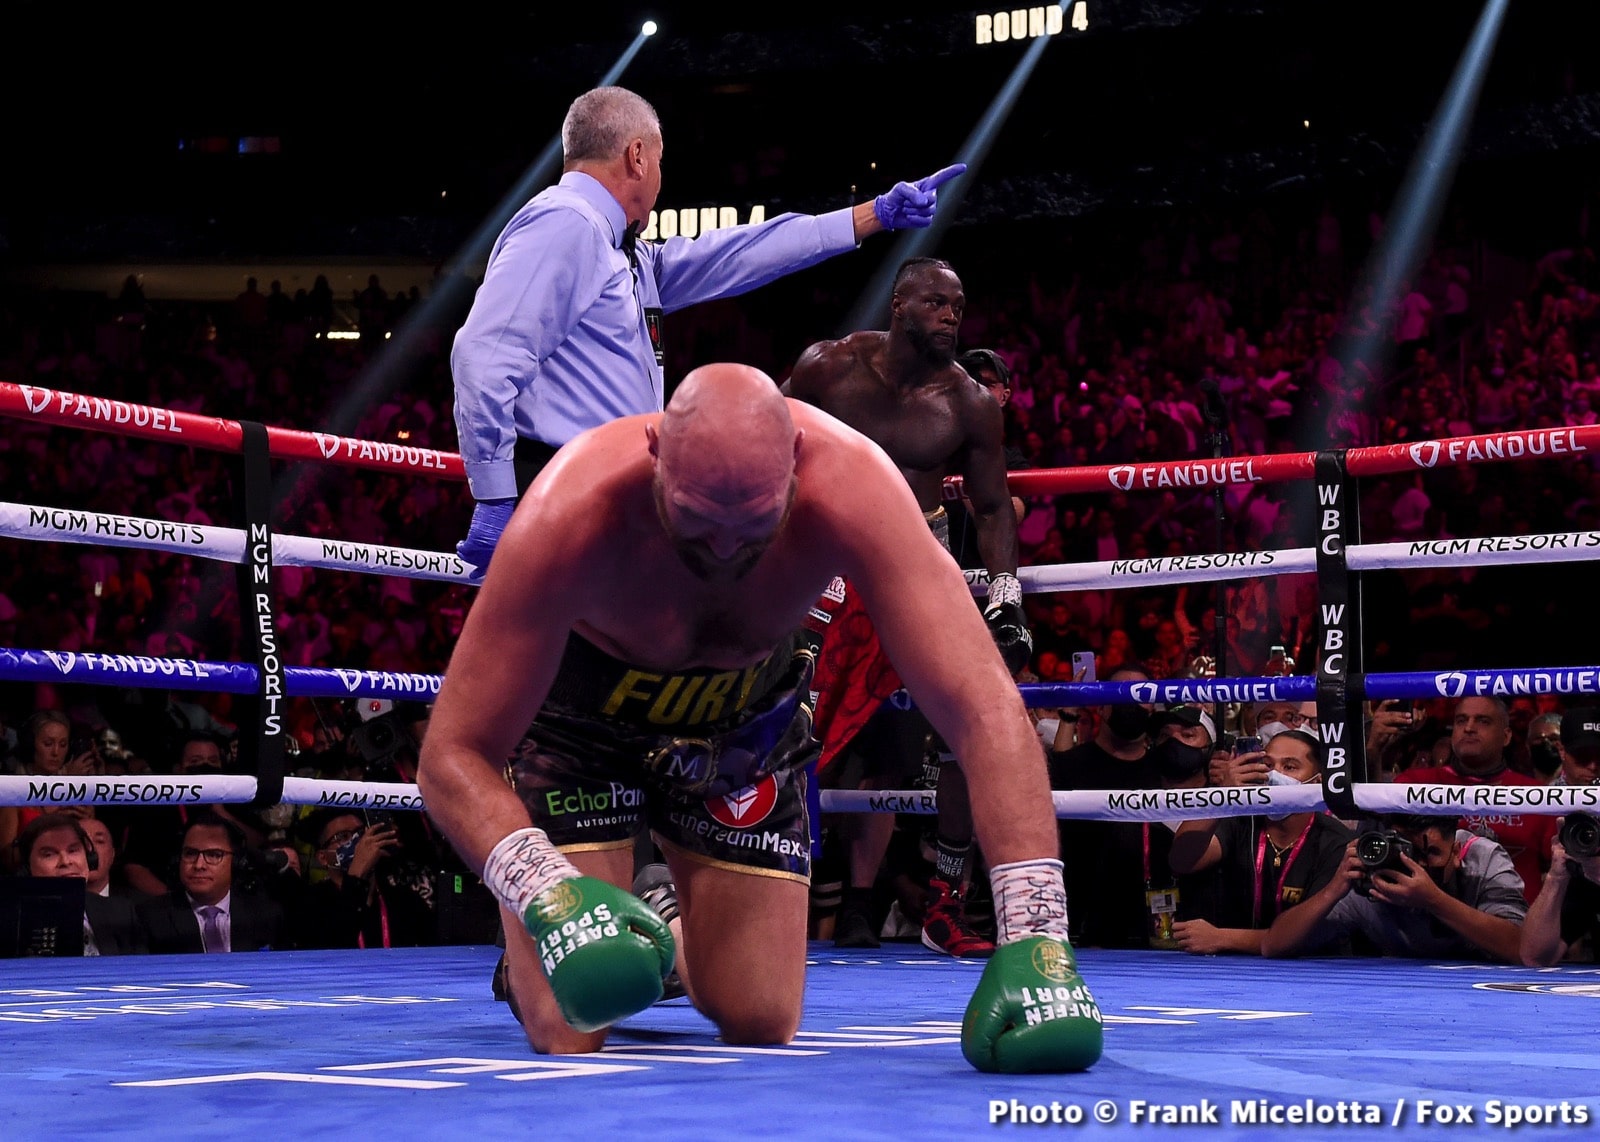 Deontay Wilder boxing news and photos